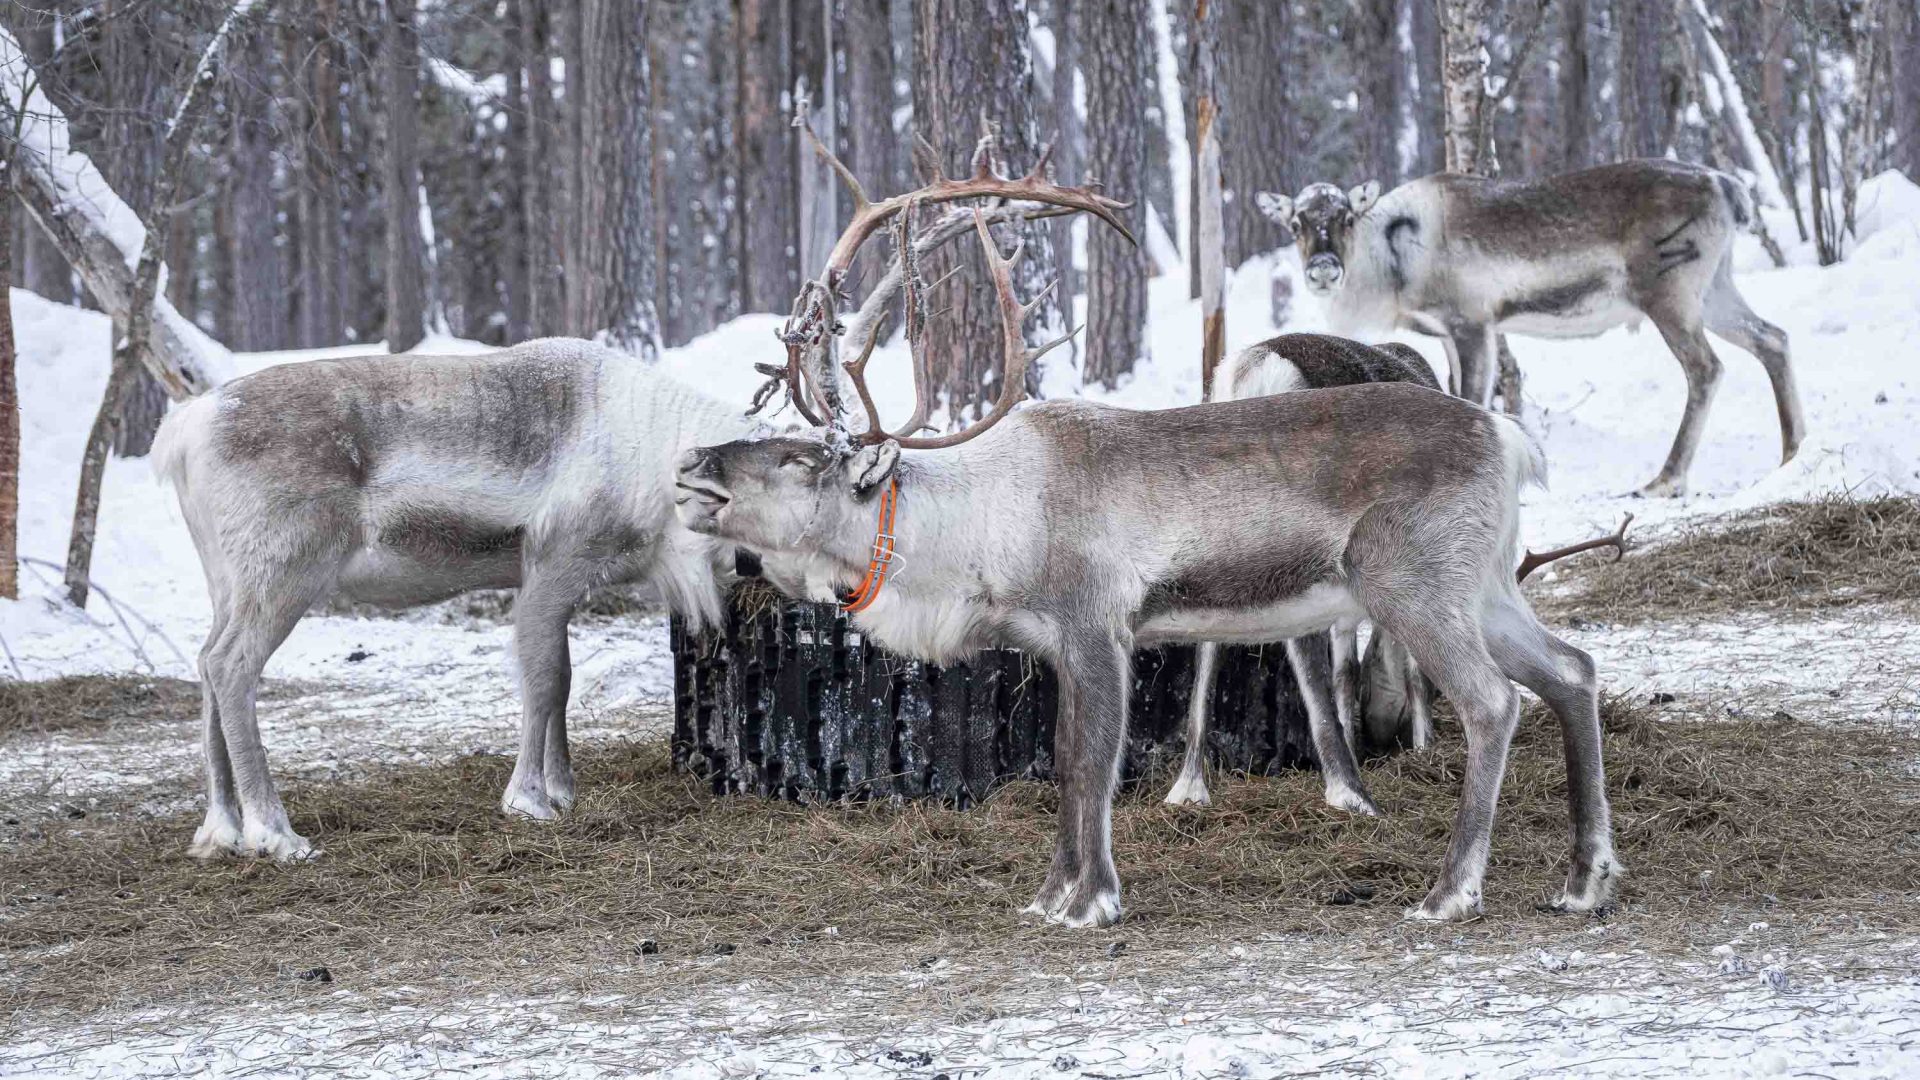 A cluster of reindeer by some trees.